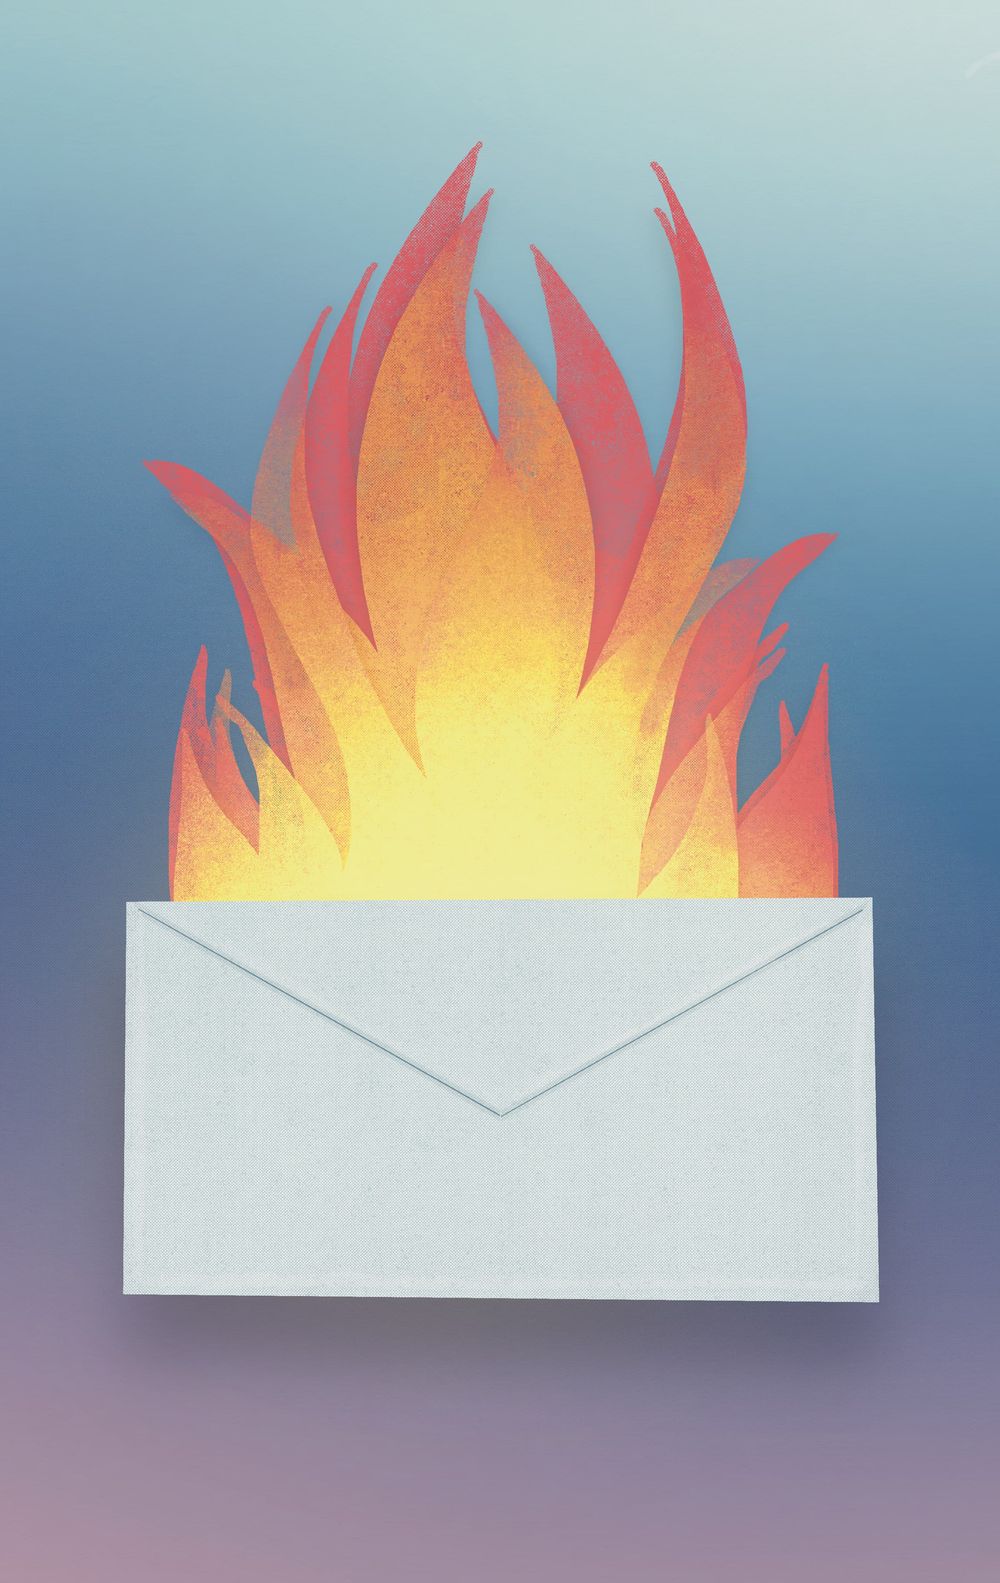 email letter on fire